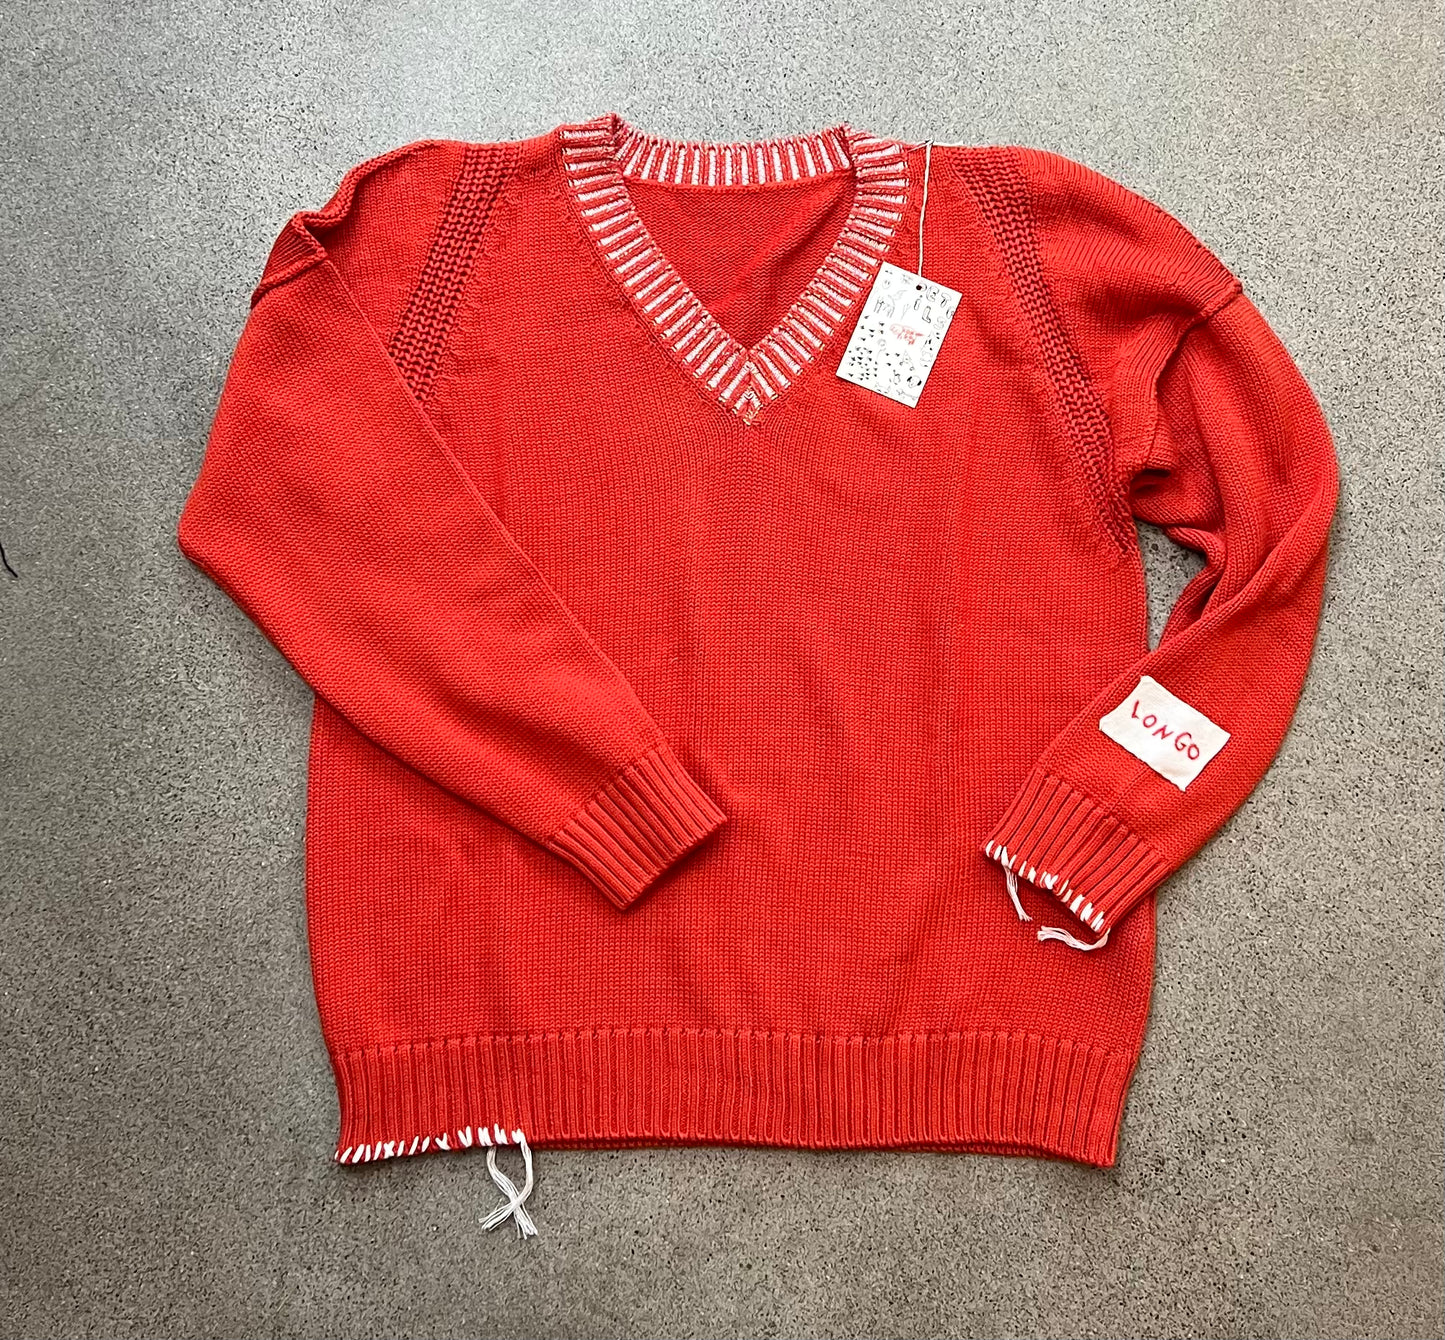 Longo - V-neck sweater with contrast stitching in Tomato Soup or Pine